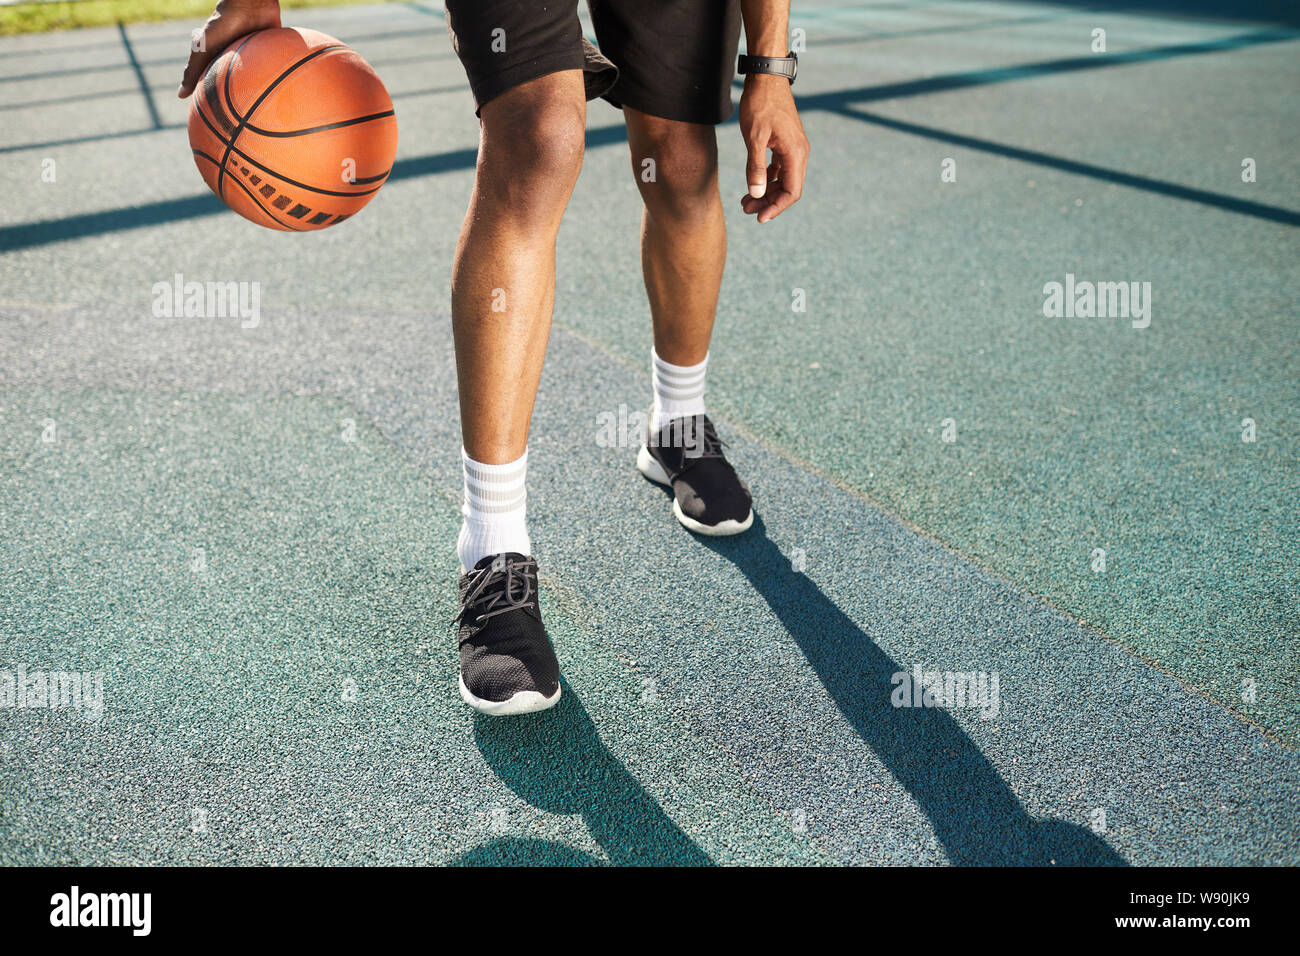 Muscular legs of unrecognizable basketball player training in outdoor court, copy space Stock Photo